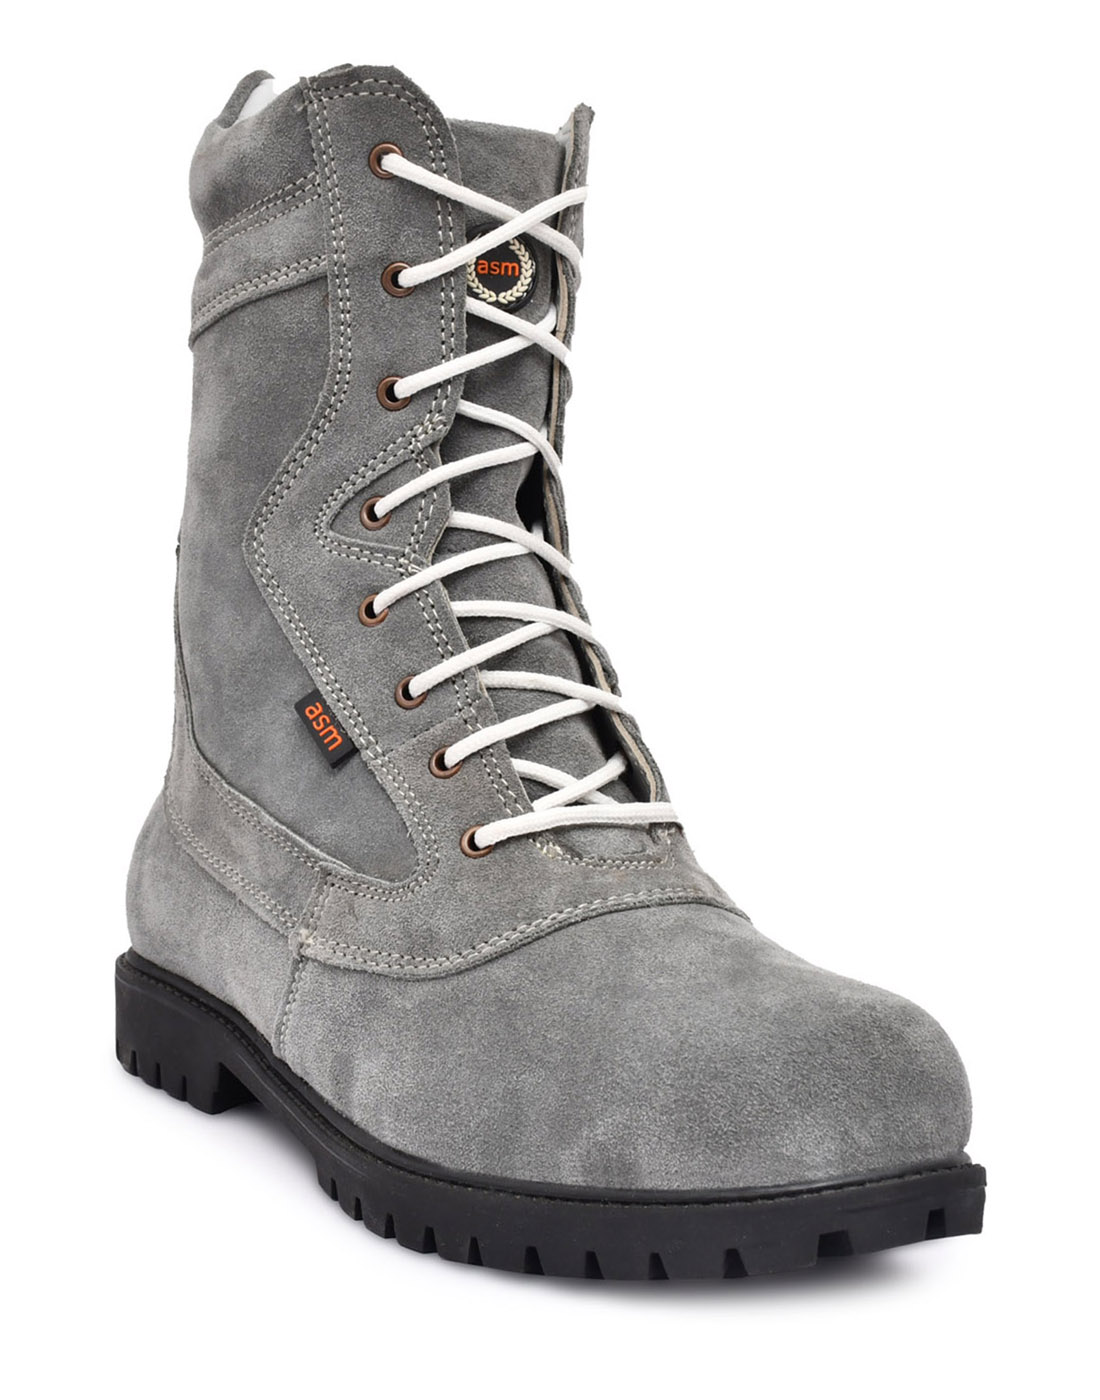 Biker Boots : Pure Grey Suede leather boots by ASM